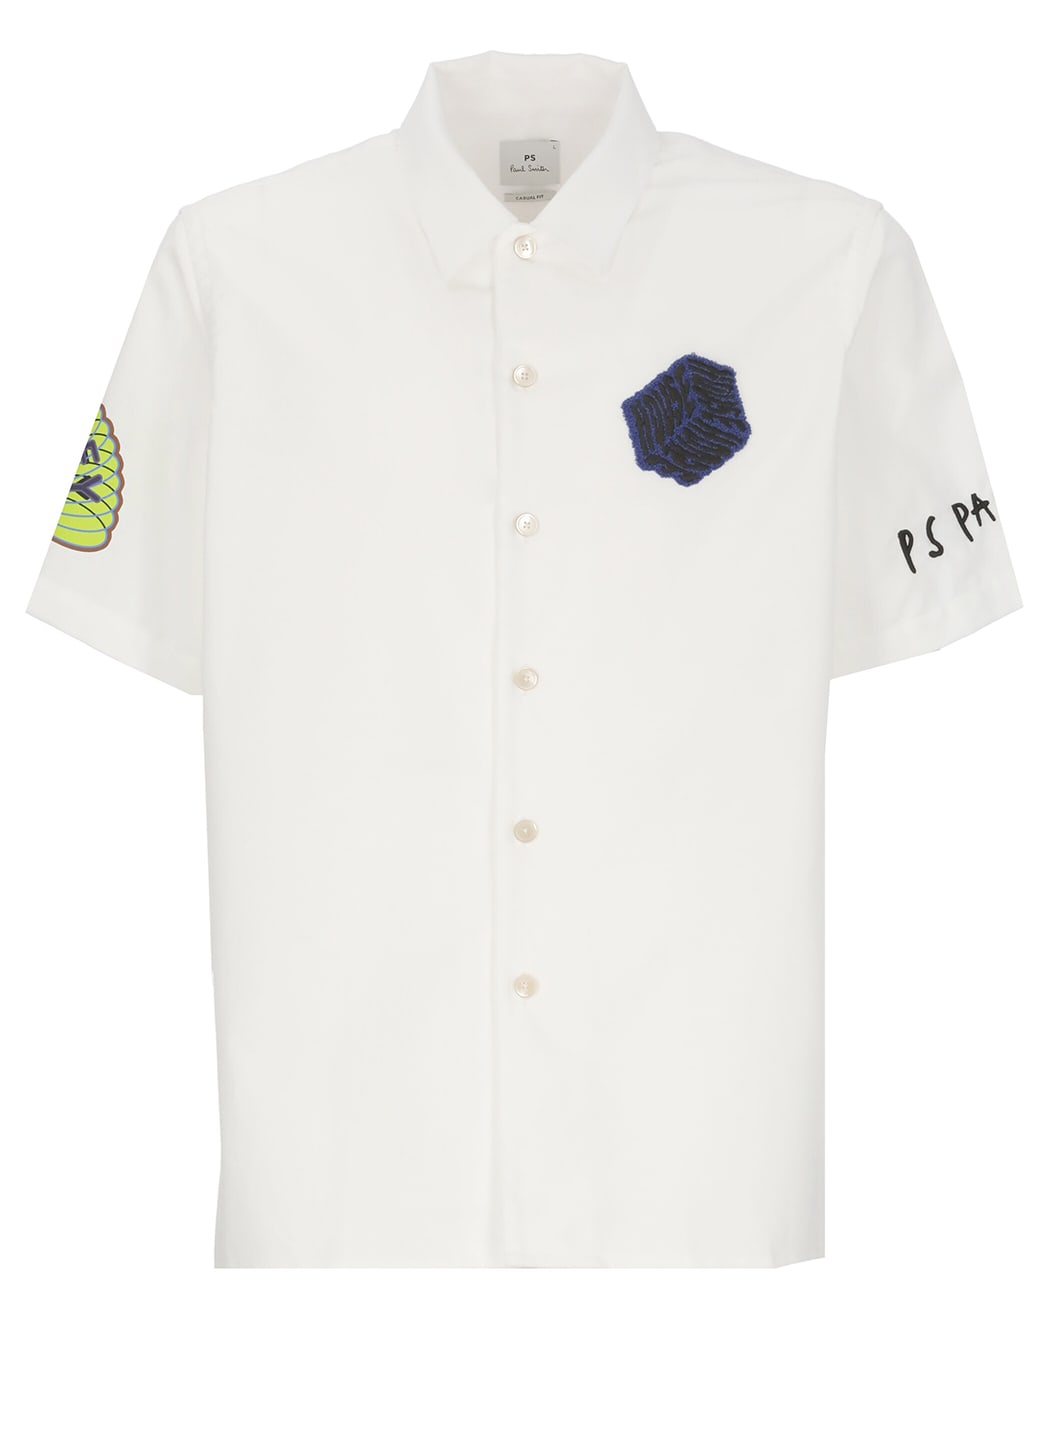 PS by Paul Smith Cotton Shirt